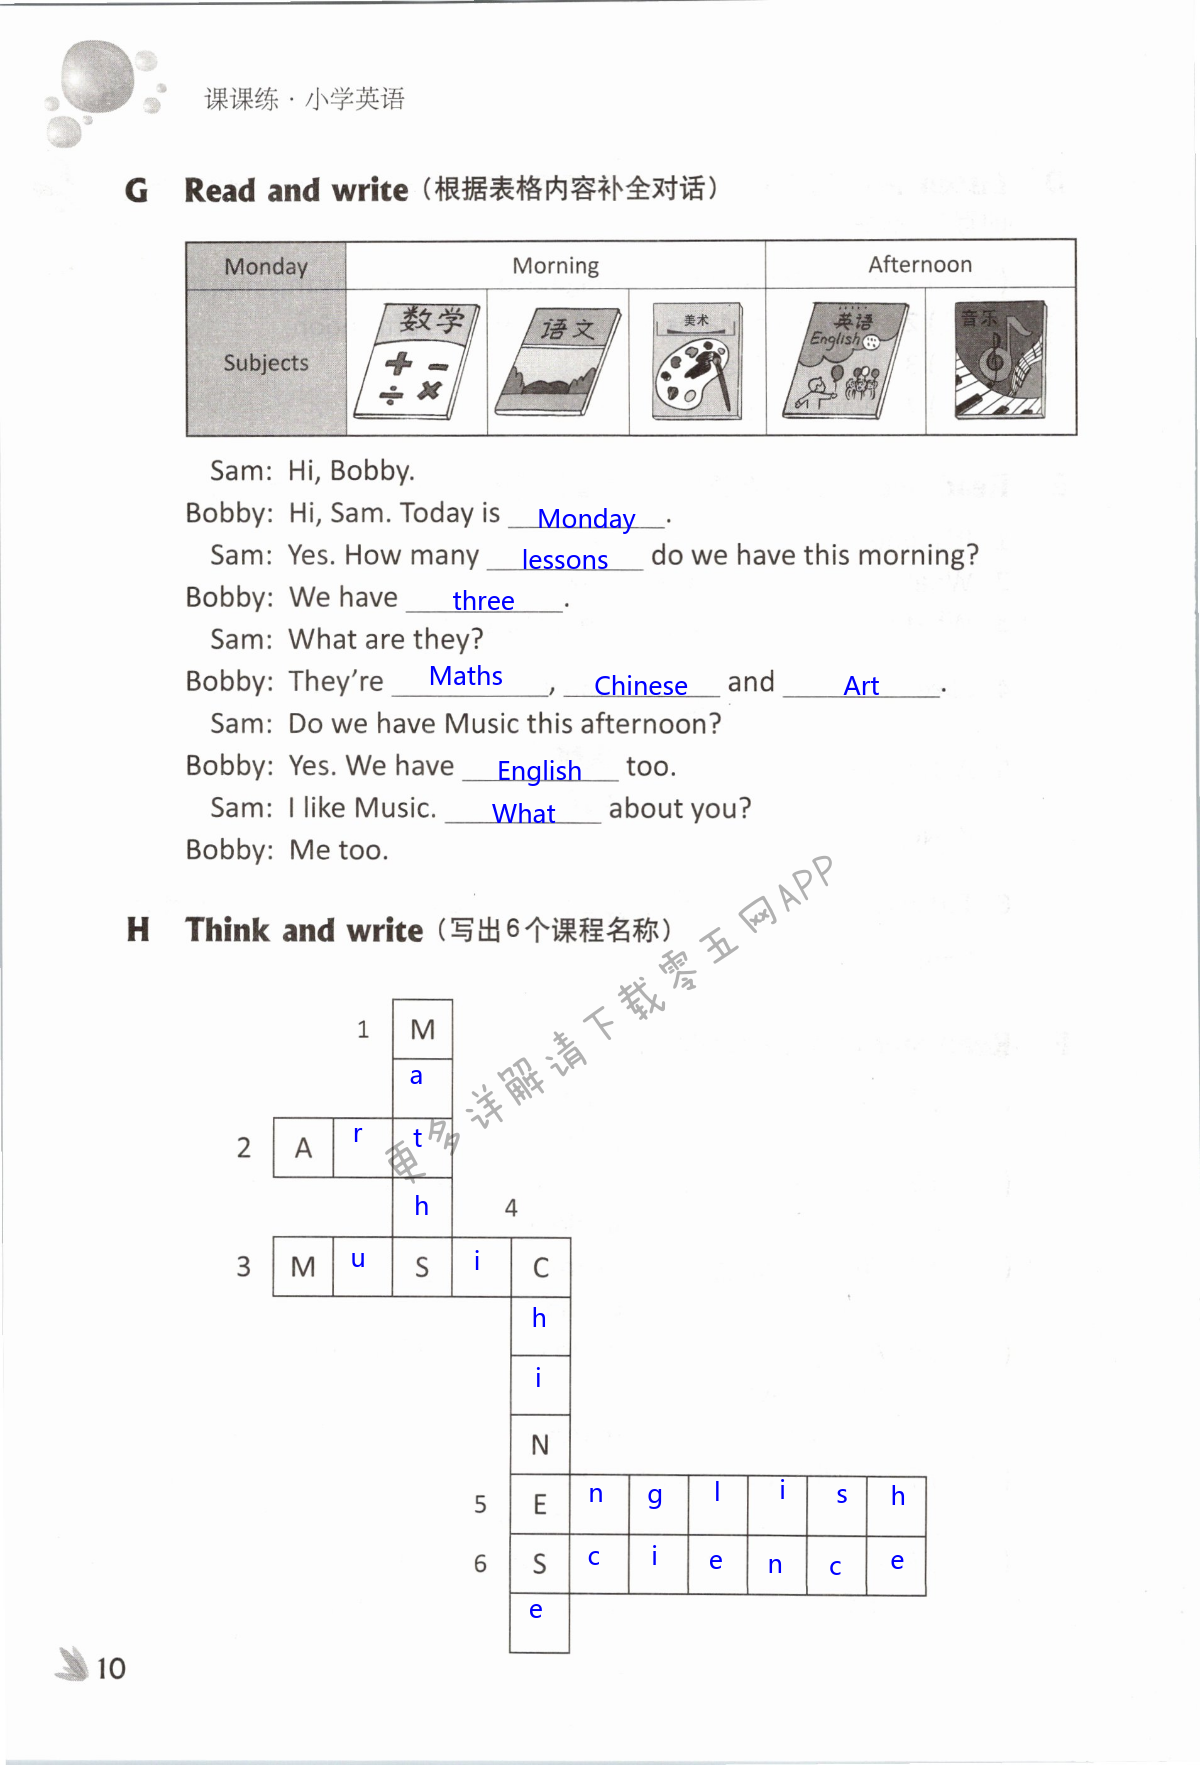 Unit 1 Our school subjects - 第10页